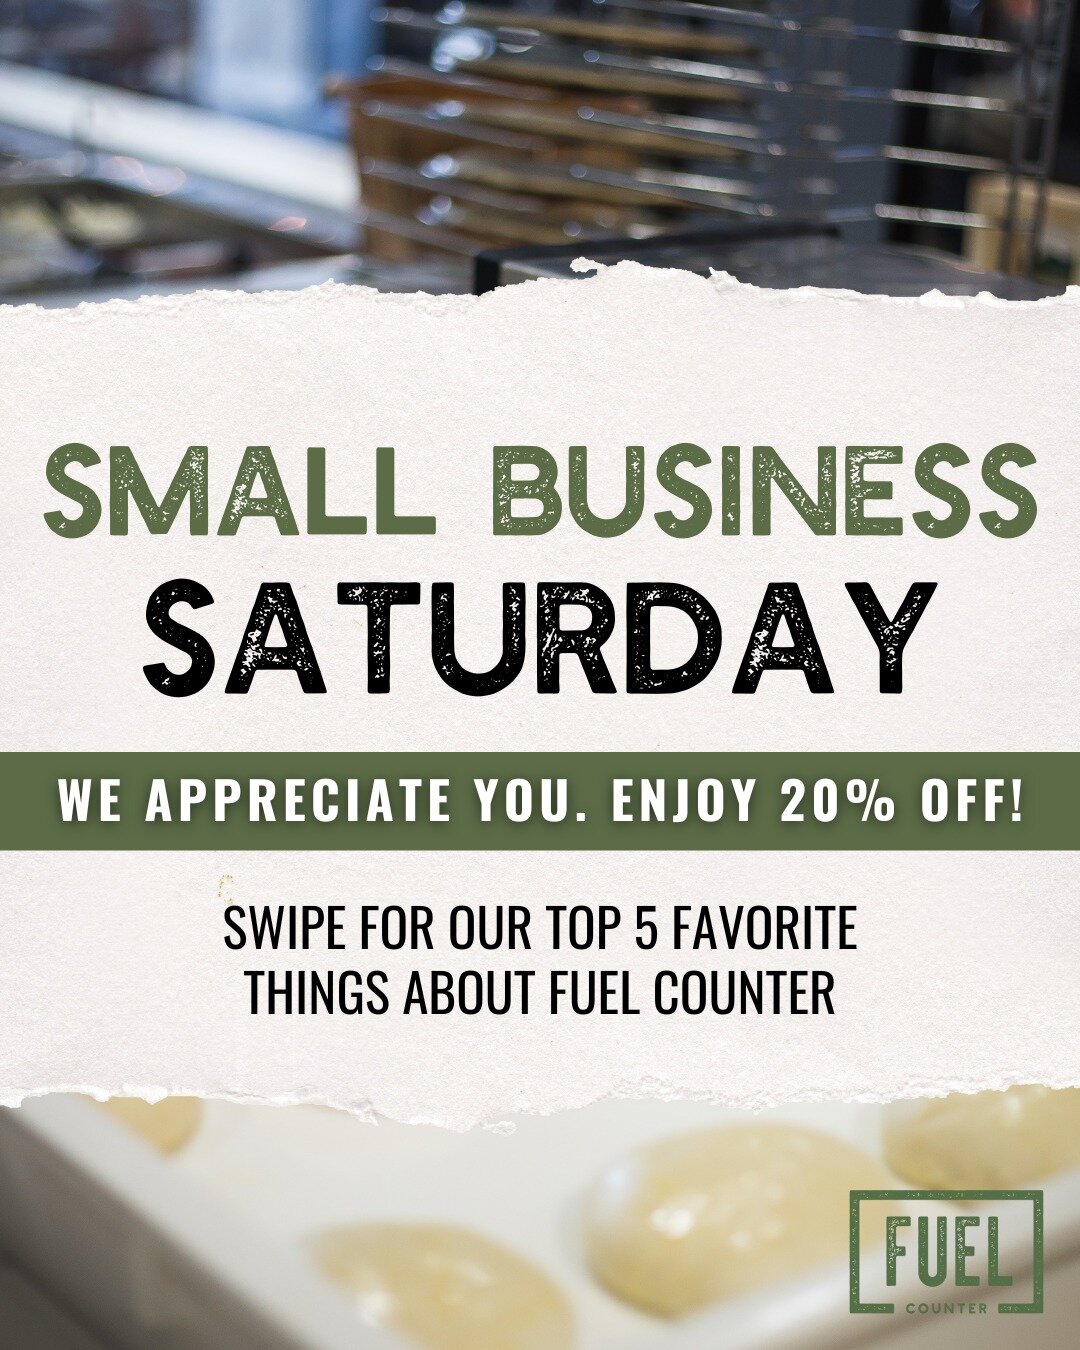 We appreciate you! Enjoy 20% OFF your in-store order at your local Fuel Counter as a massive thank you for supporting a small business this Small Business Saturday 💚 this offer is only for today so be sure to set up your lunch/dinner dates now! 

+ 